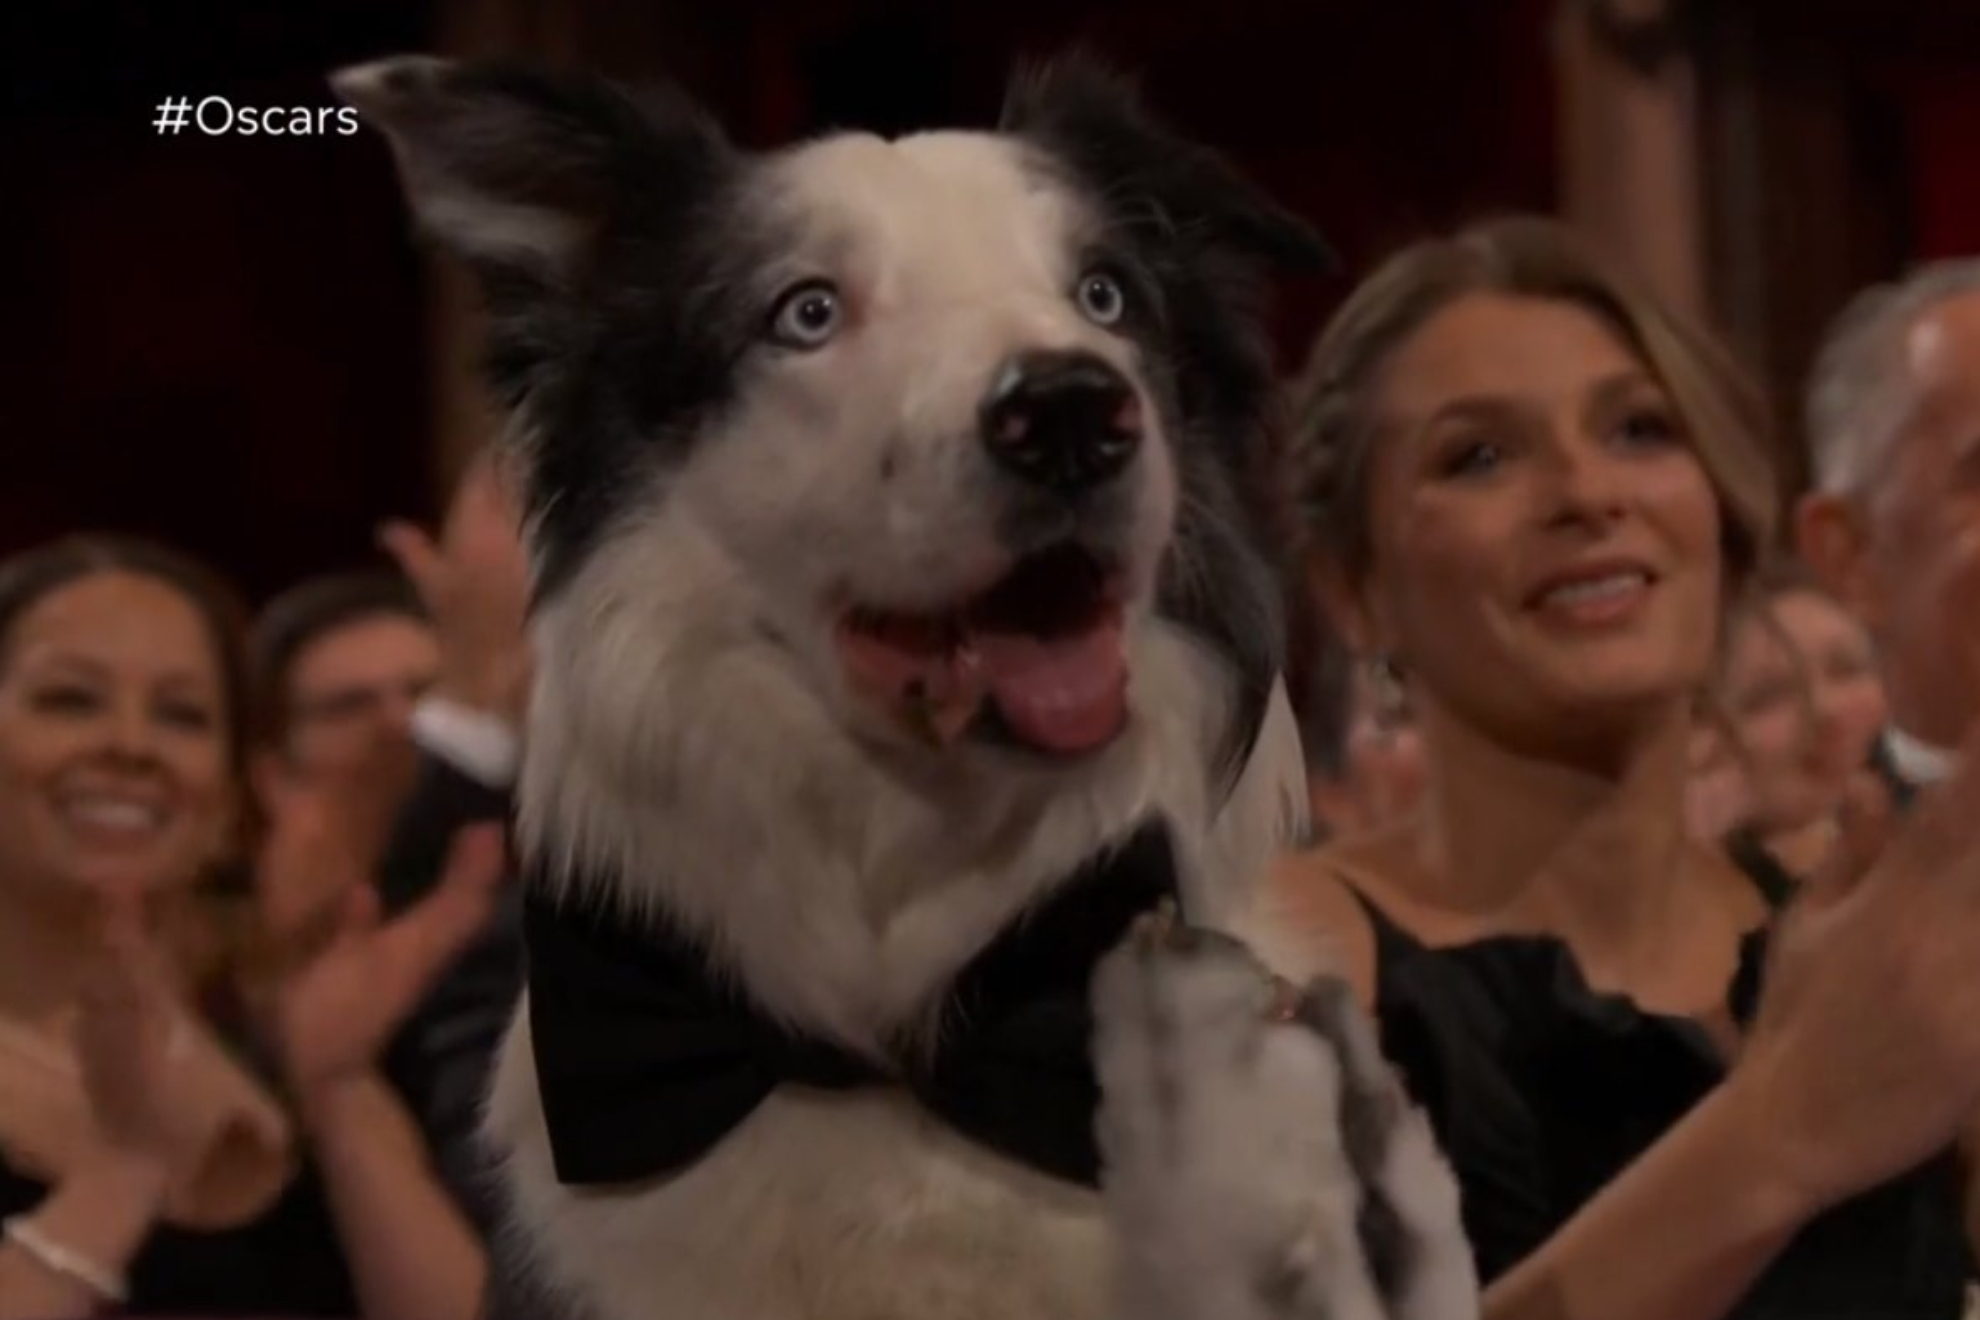 Messi was at the Oscars